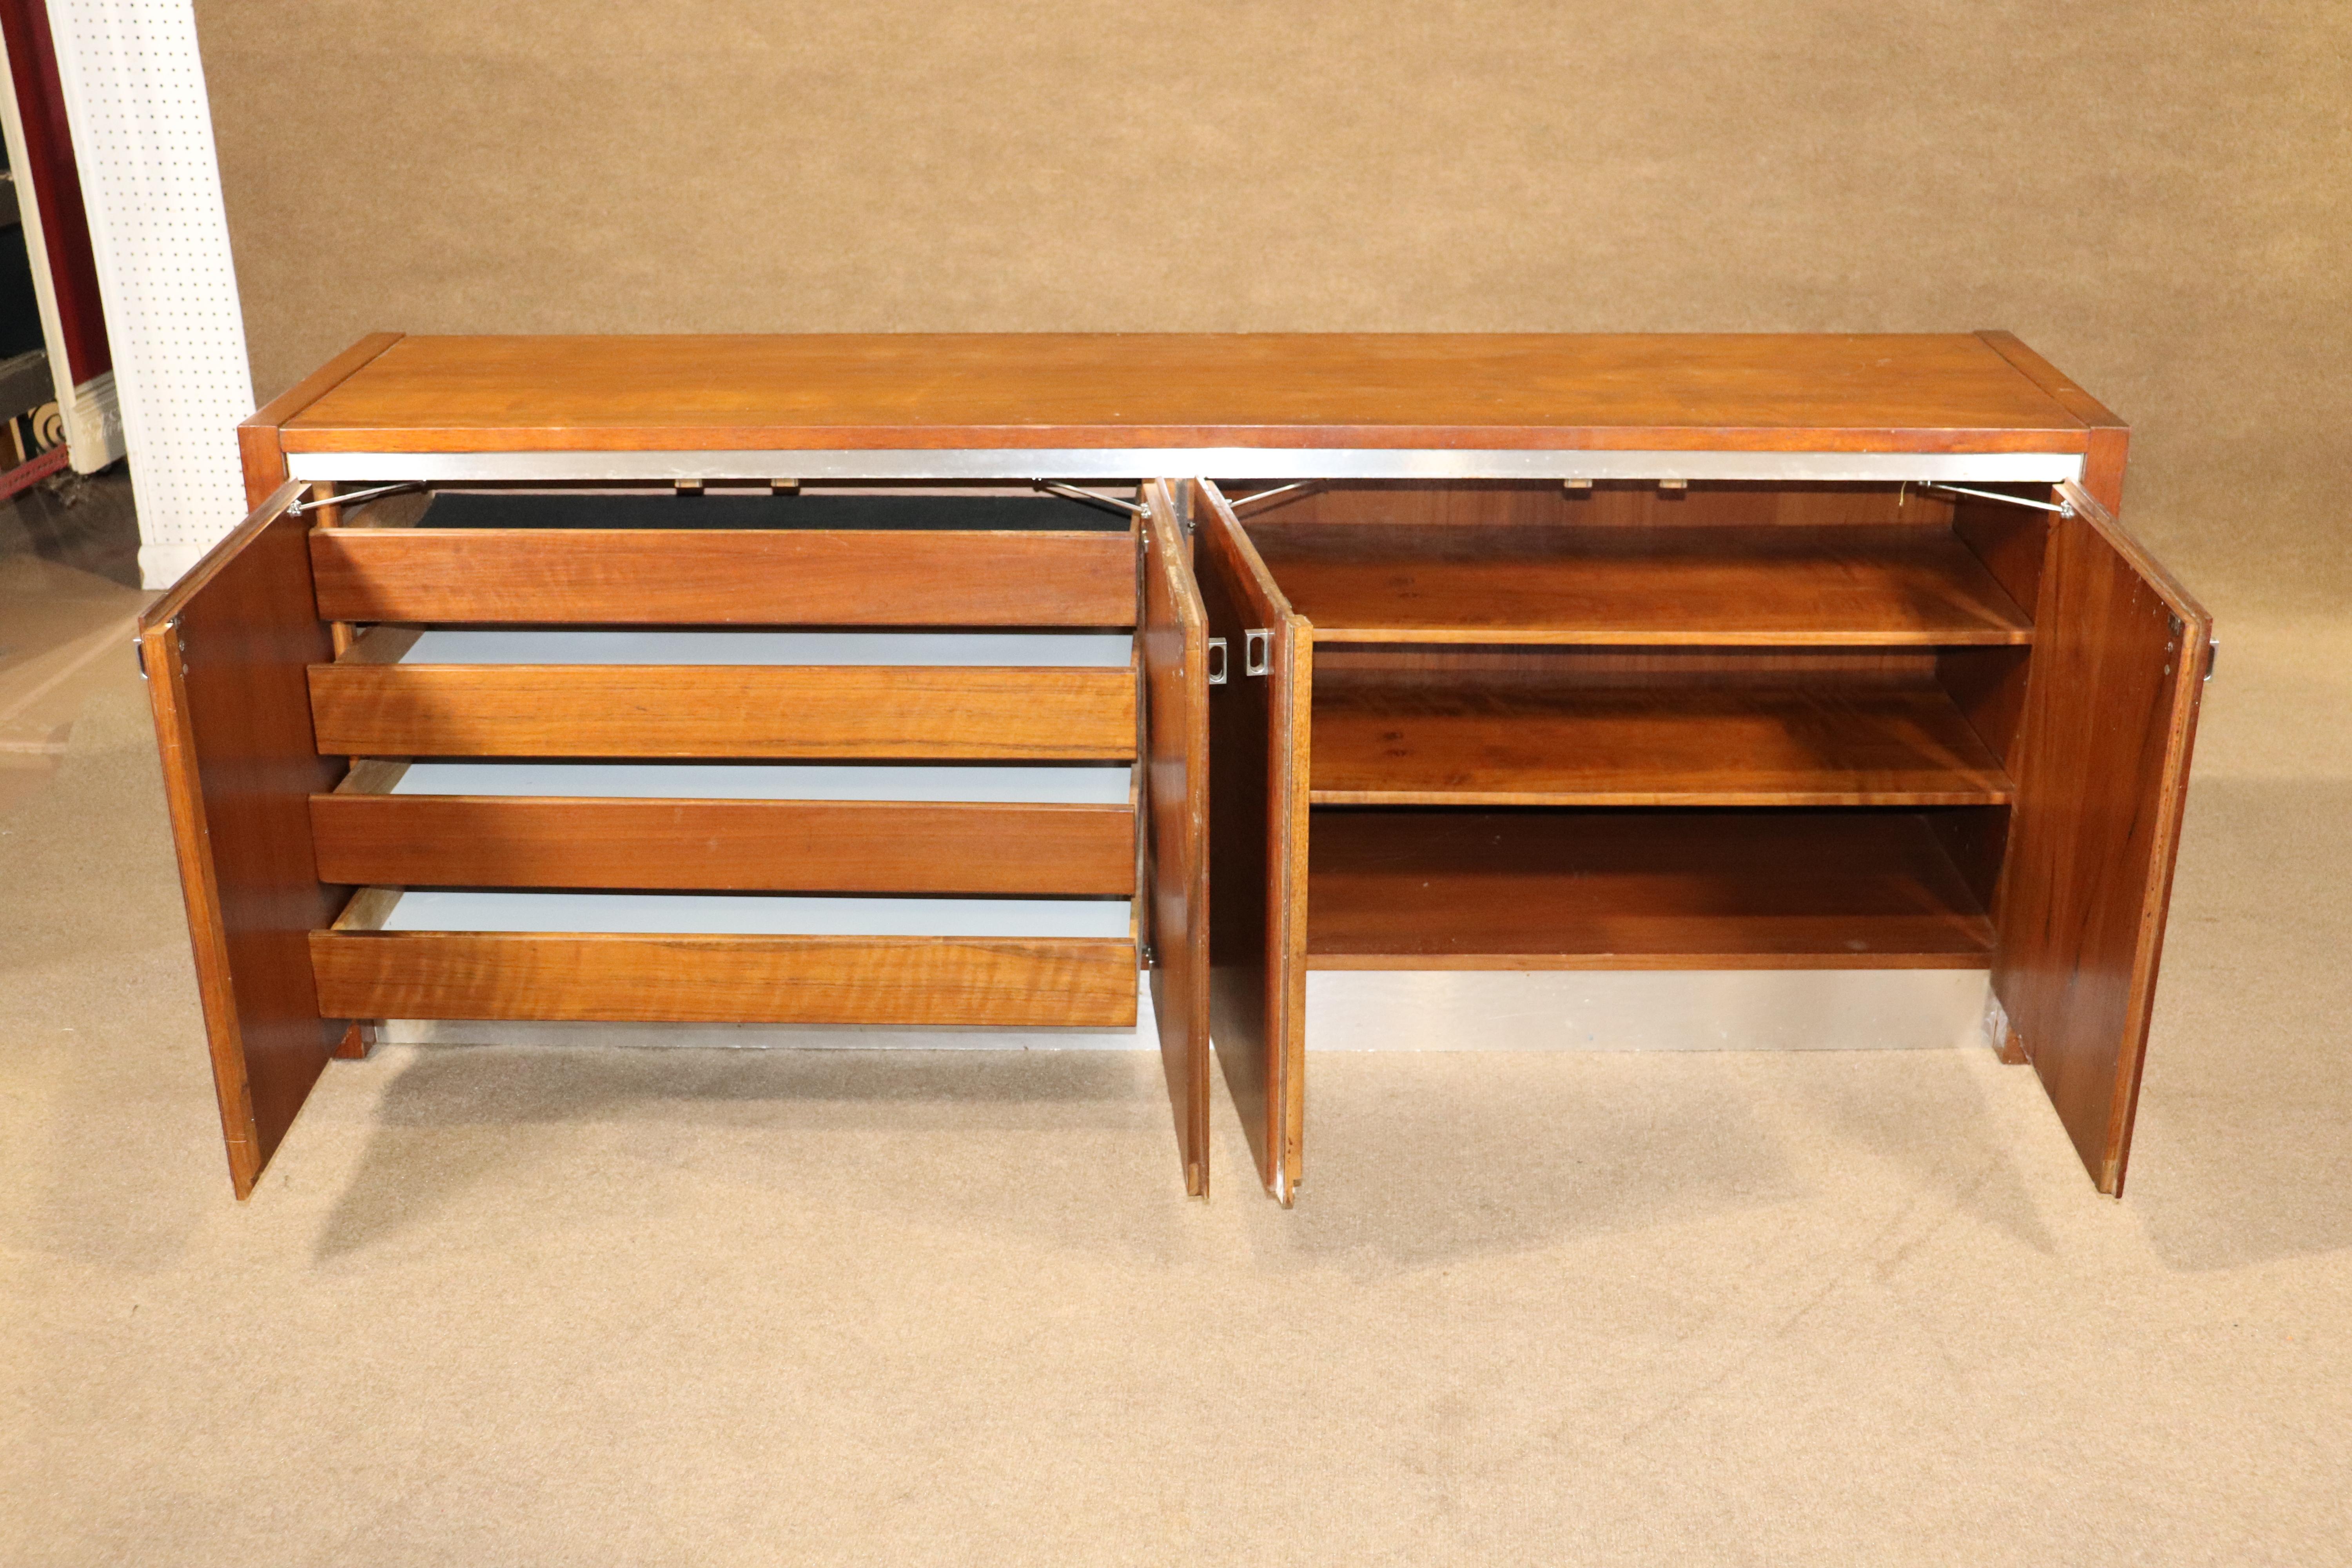 Mid-century modern sideboard by Founders with drawer and cabinet storage. Great for home or office use. Warm teak wood with accenting chrome hardware.
Please confirm location NY or NJ.